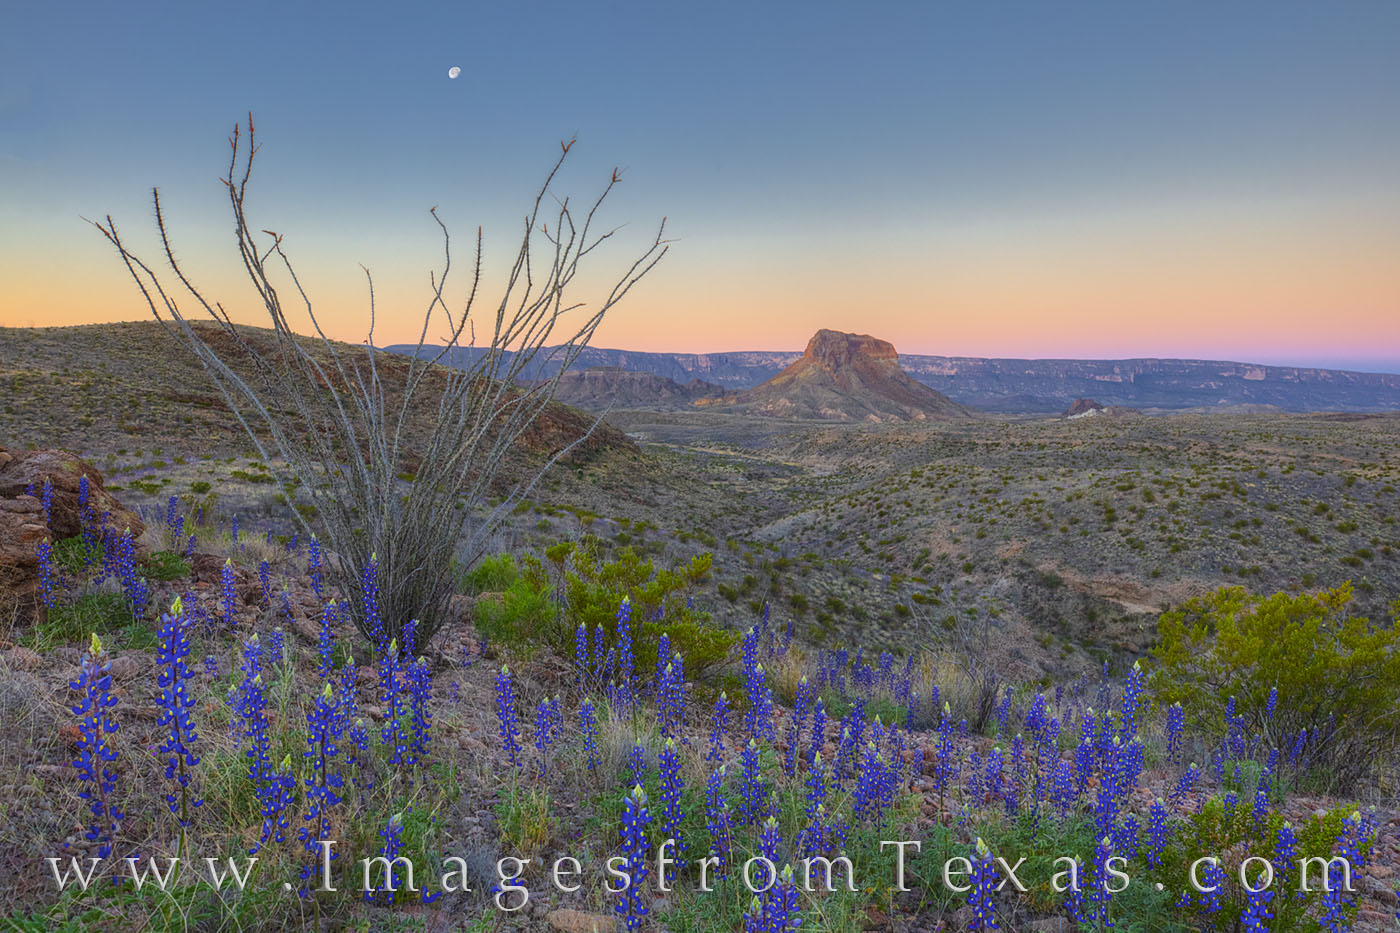 With the sun rising in the east, the three-quarters moon began to fade in the west. Under a tranquil west Texxas sky, bluebonnets...